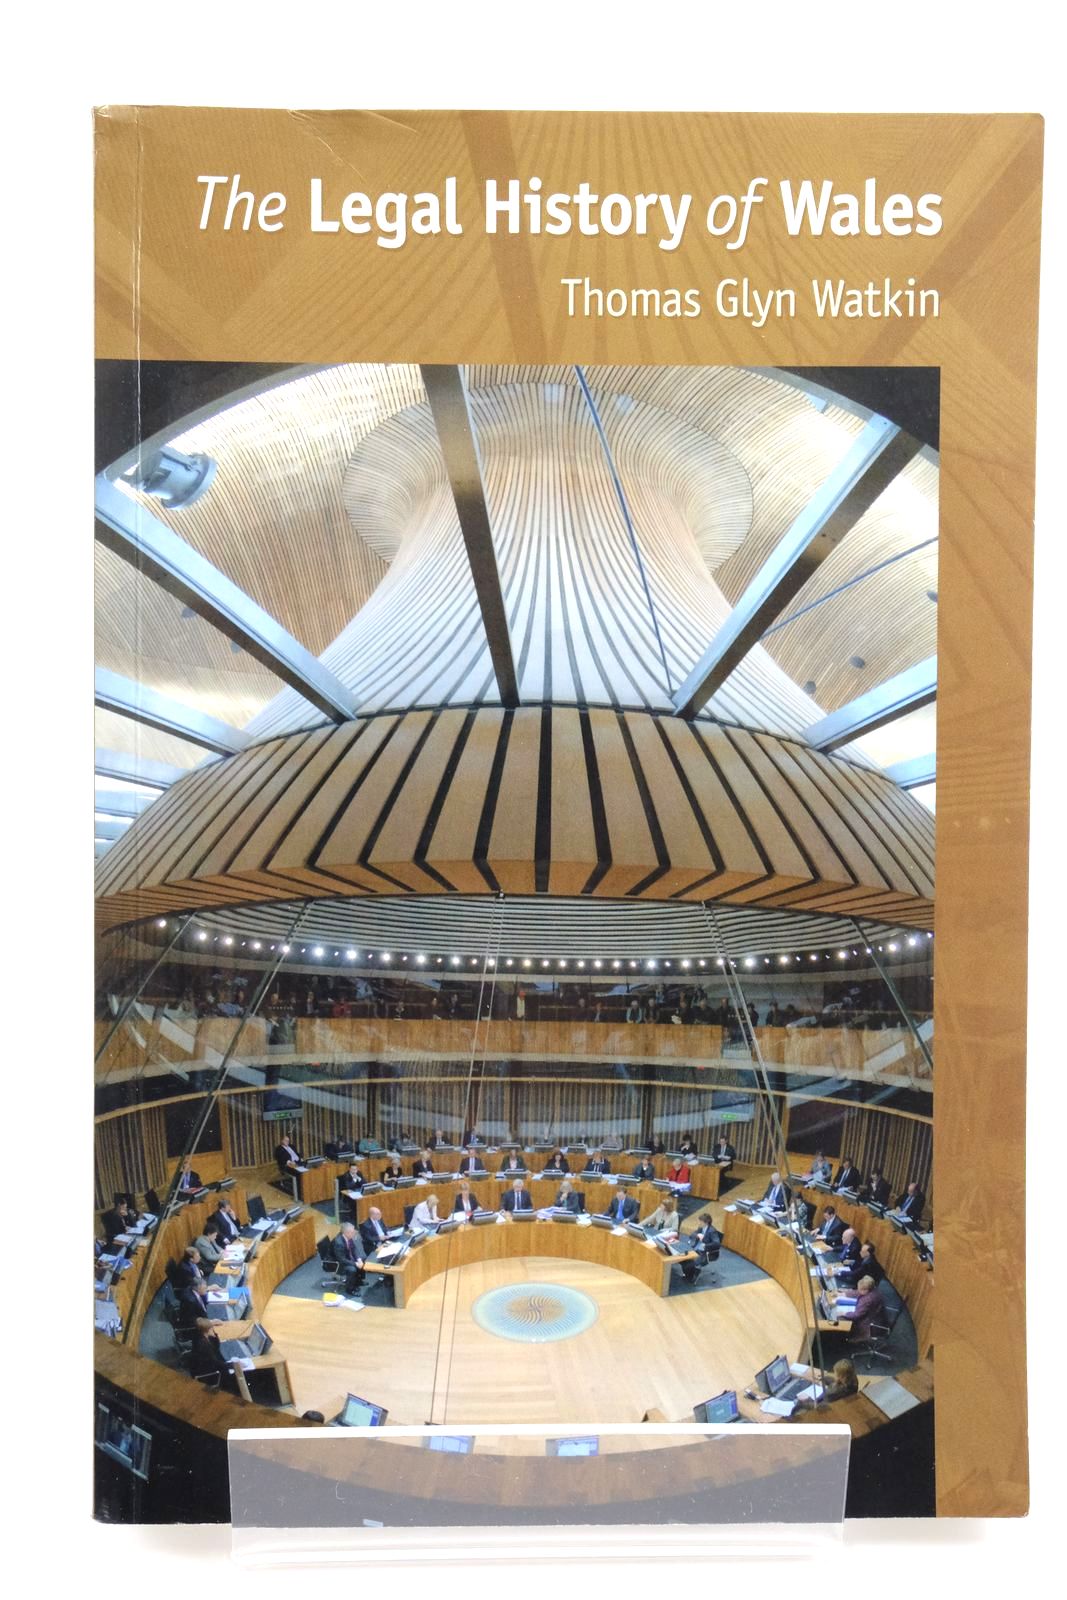 Photo of THE LEGAL HISTORY OF WALES written by Watkin, Thomas Glyn published by University of Wales (STOCK CODE: 2135280)  for sale by Stella & Rose's Books